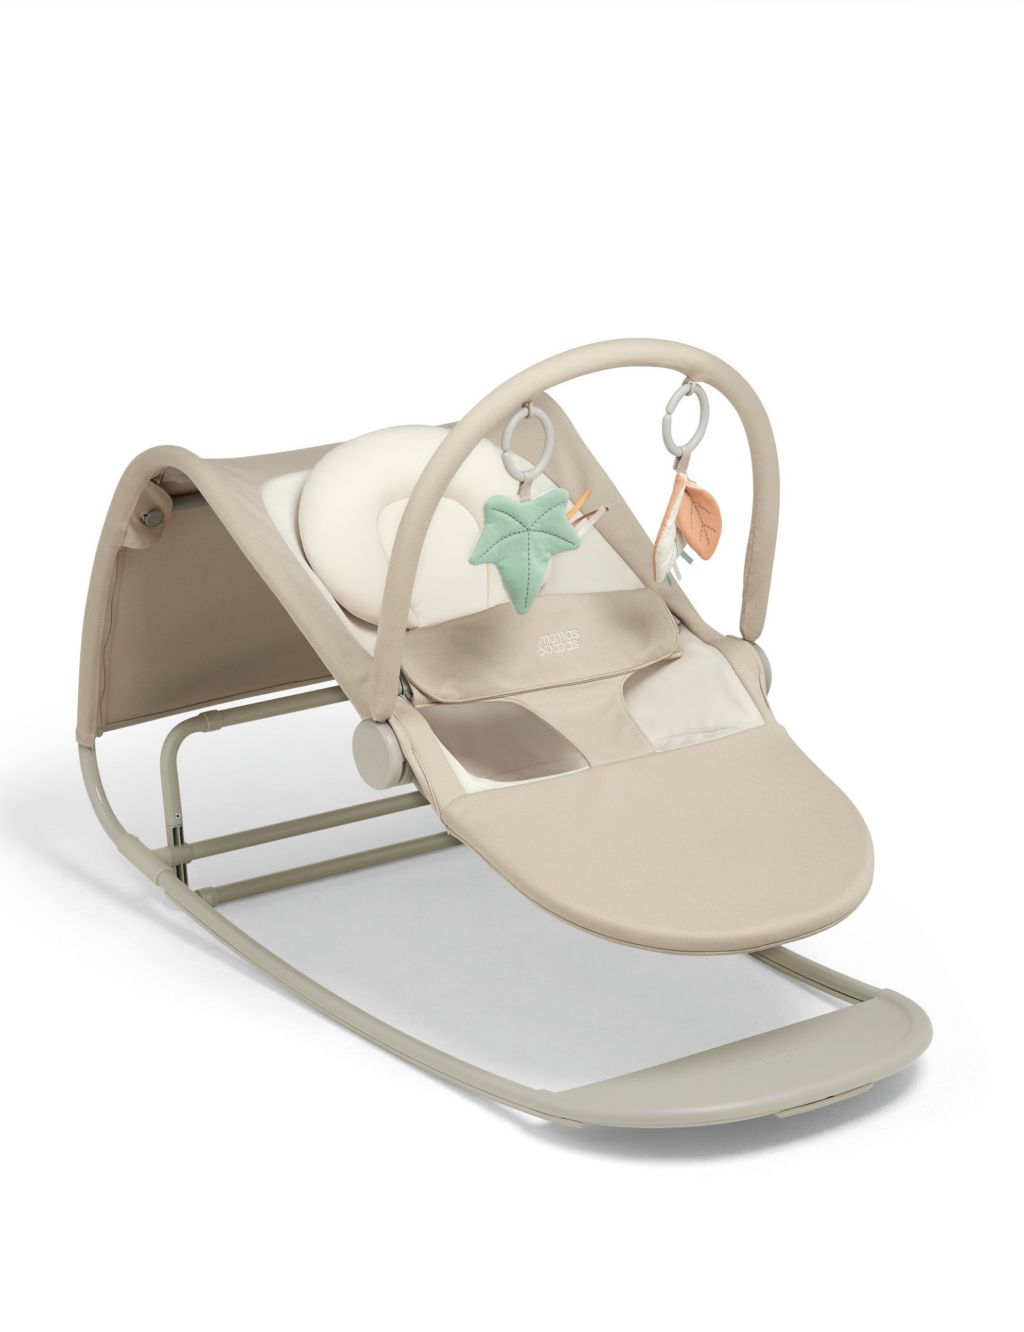 Tempo 3-in-1 Rocker Ivy Bouncer 7 of 9